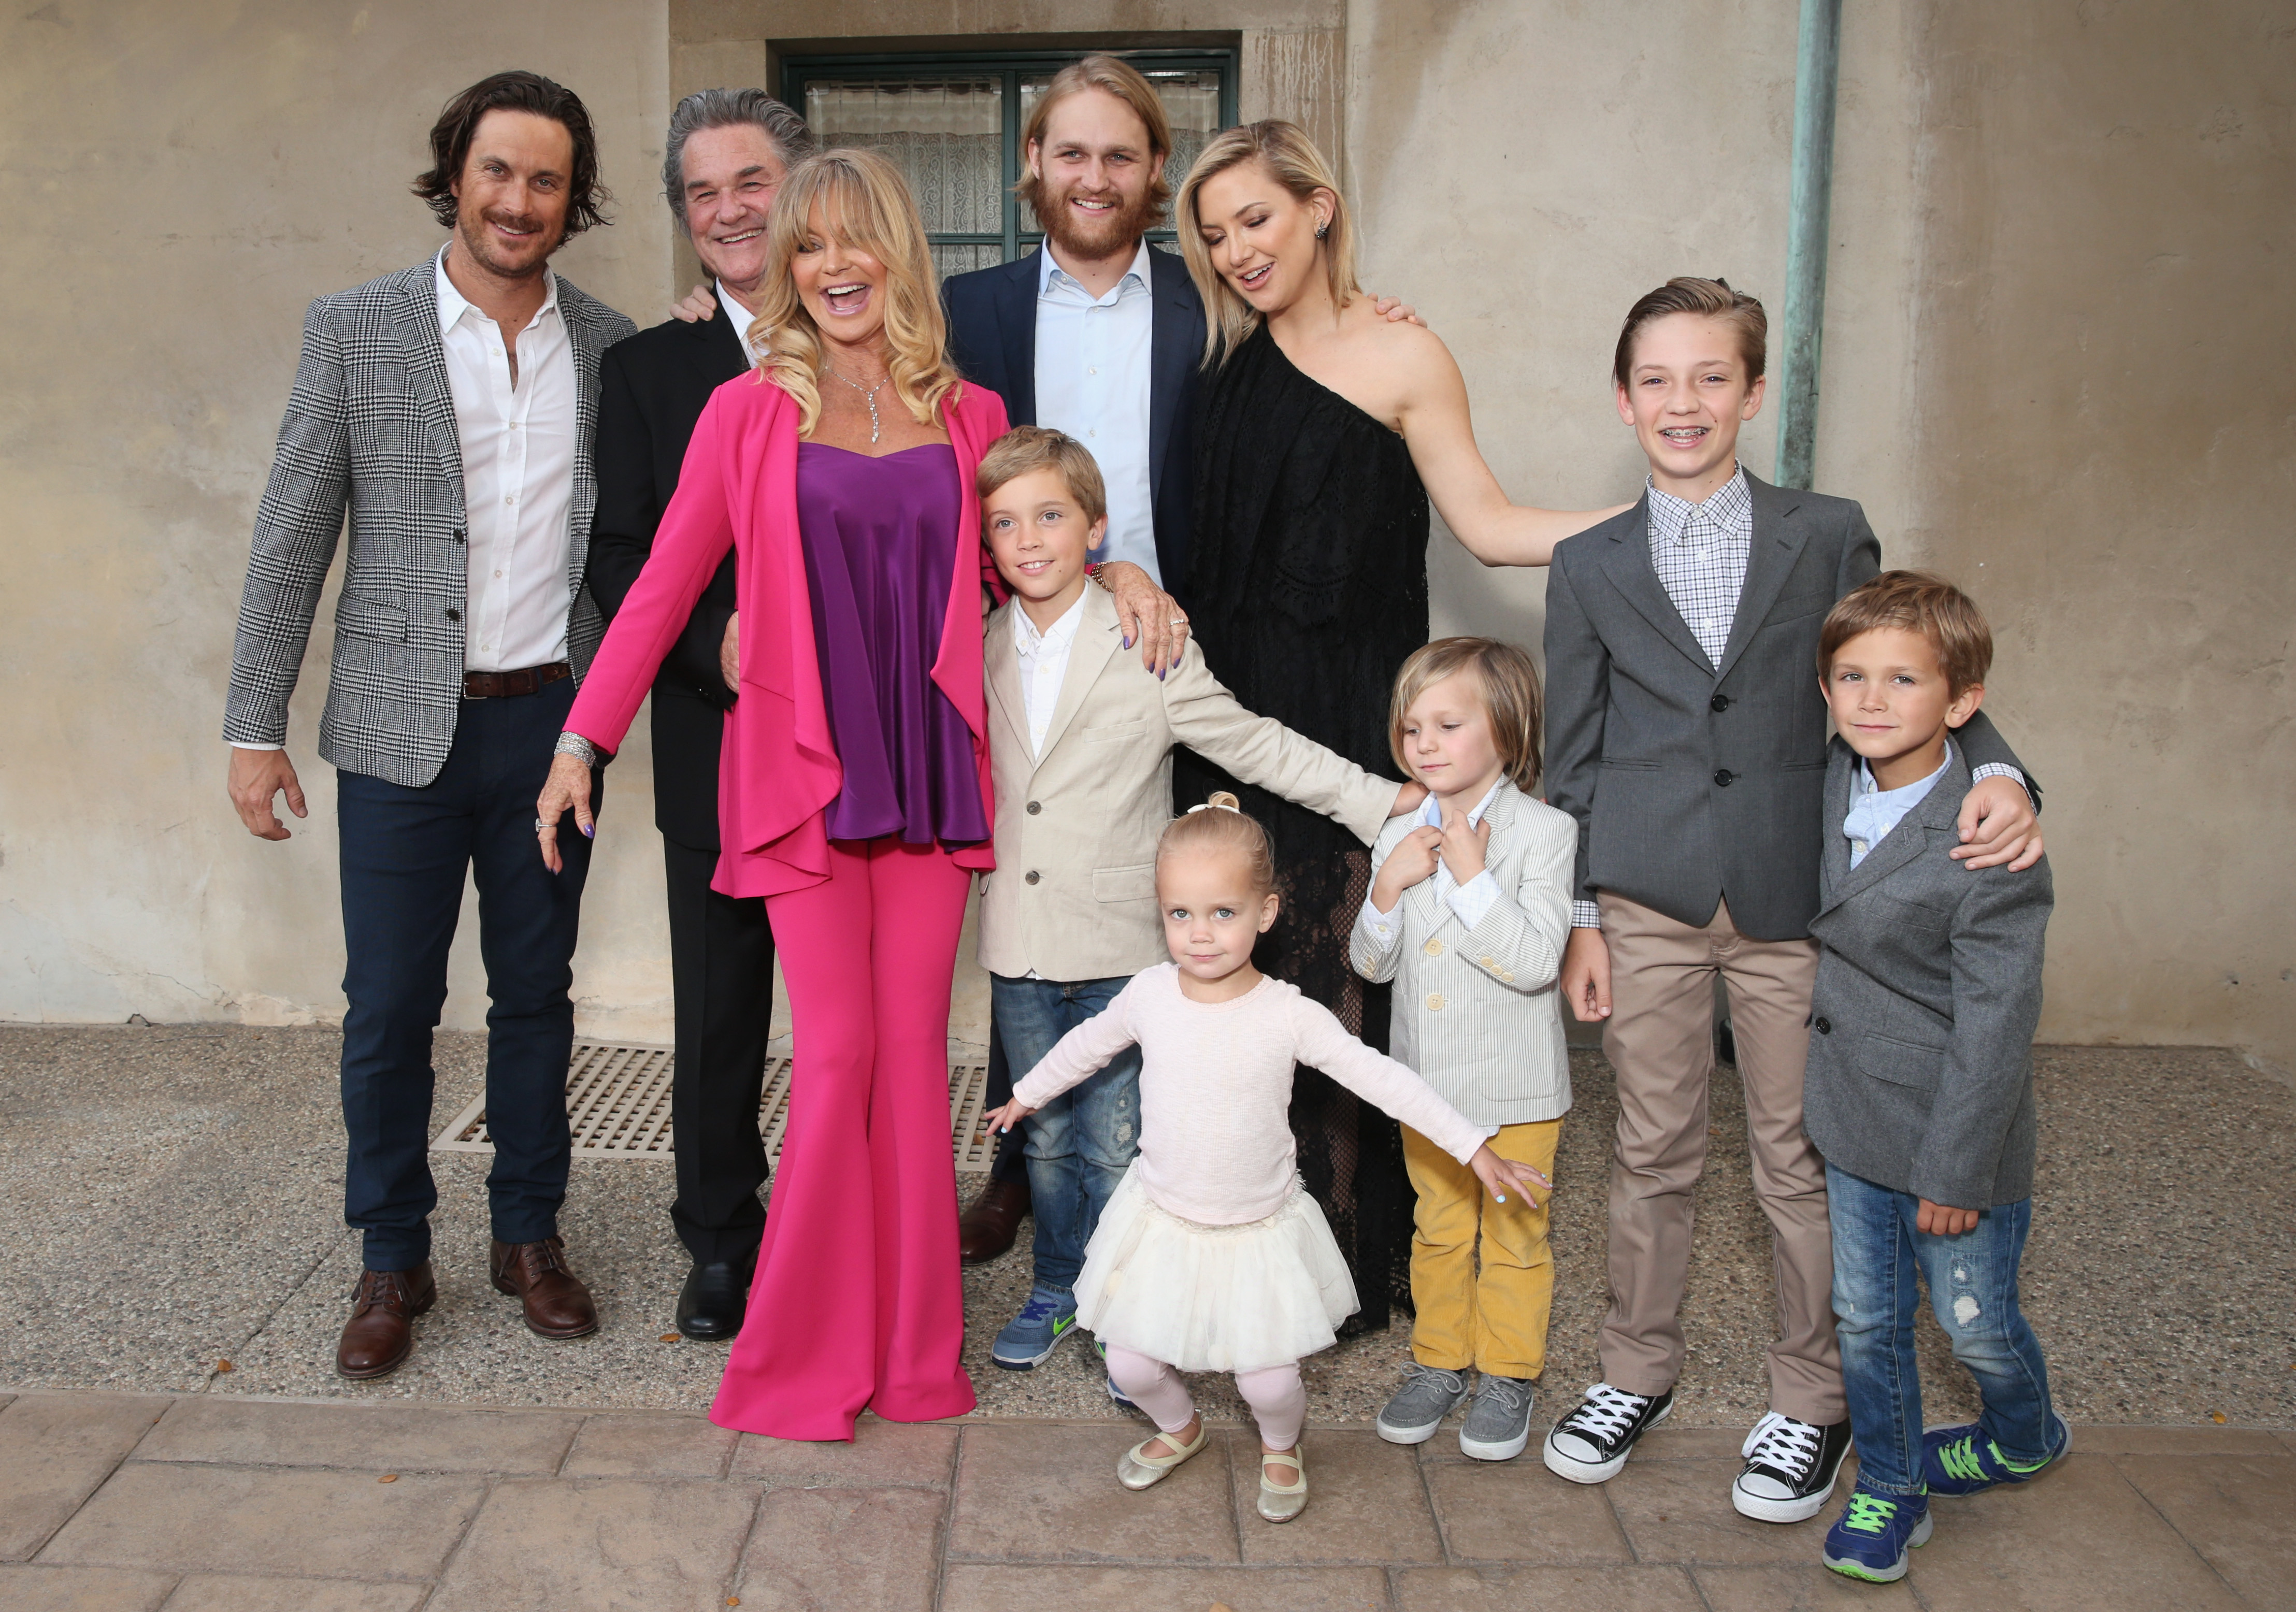 Oliver Hudson, Kurt Russell, Goldie Hawn, Wyatt Russell, and Kate Hudson with kids Ryder Robinson, Wilder Hudson, Bodhi Hudson, Rio Hudson, and Bingham Bellamy on May 6, 2016 in Beverly Hills, California | Source: Getty Images